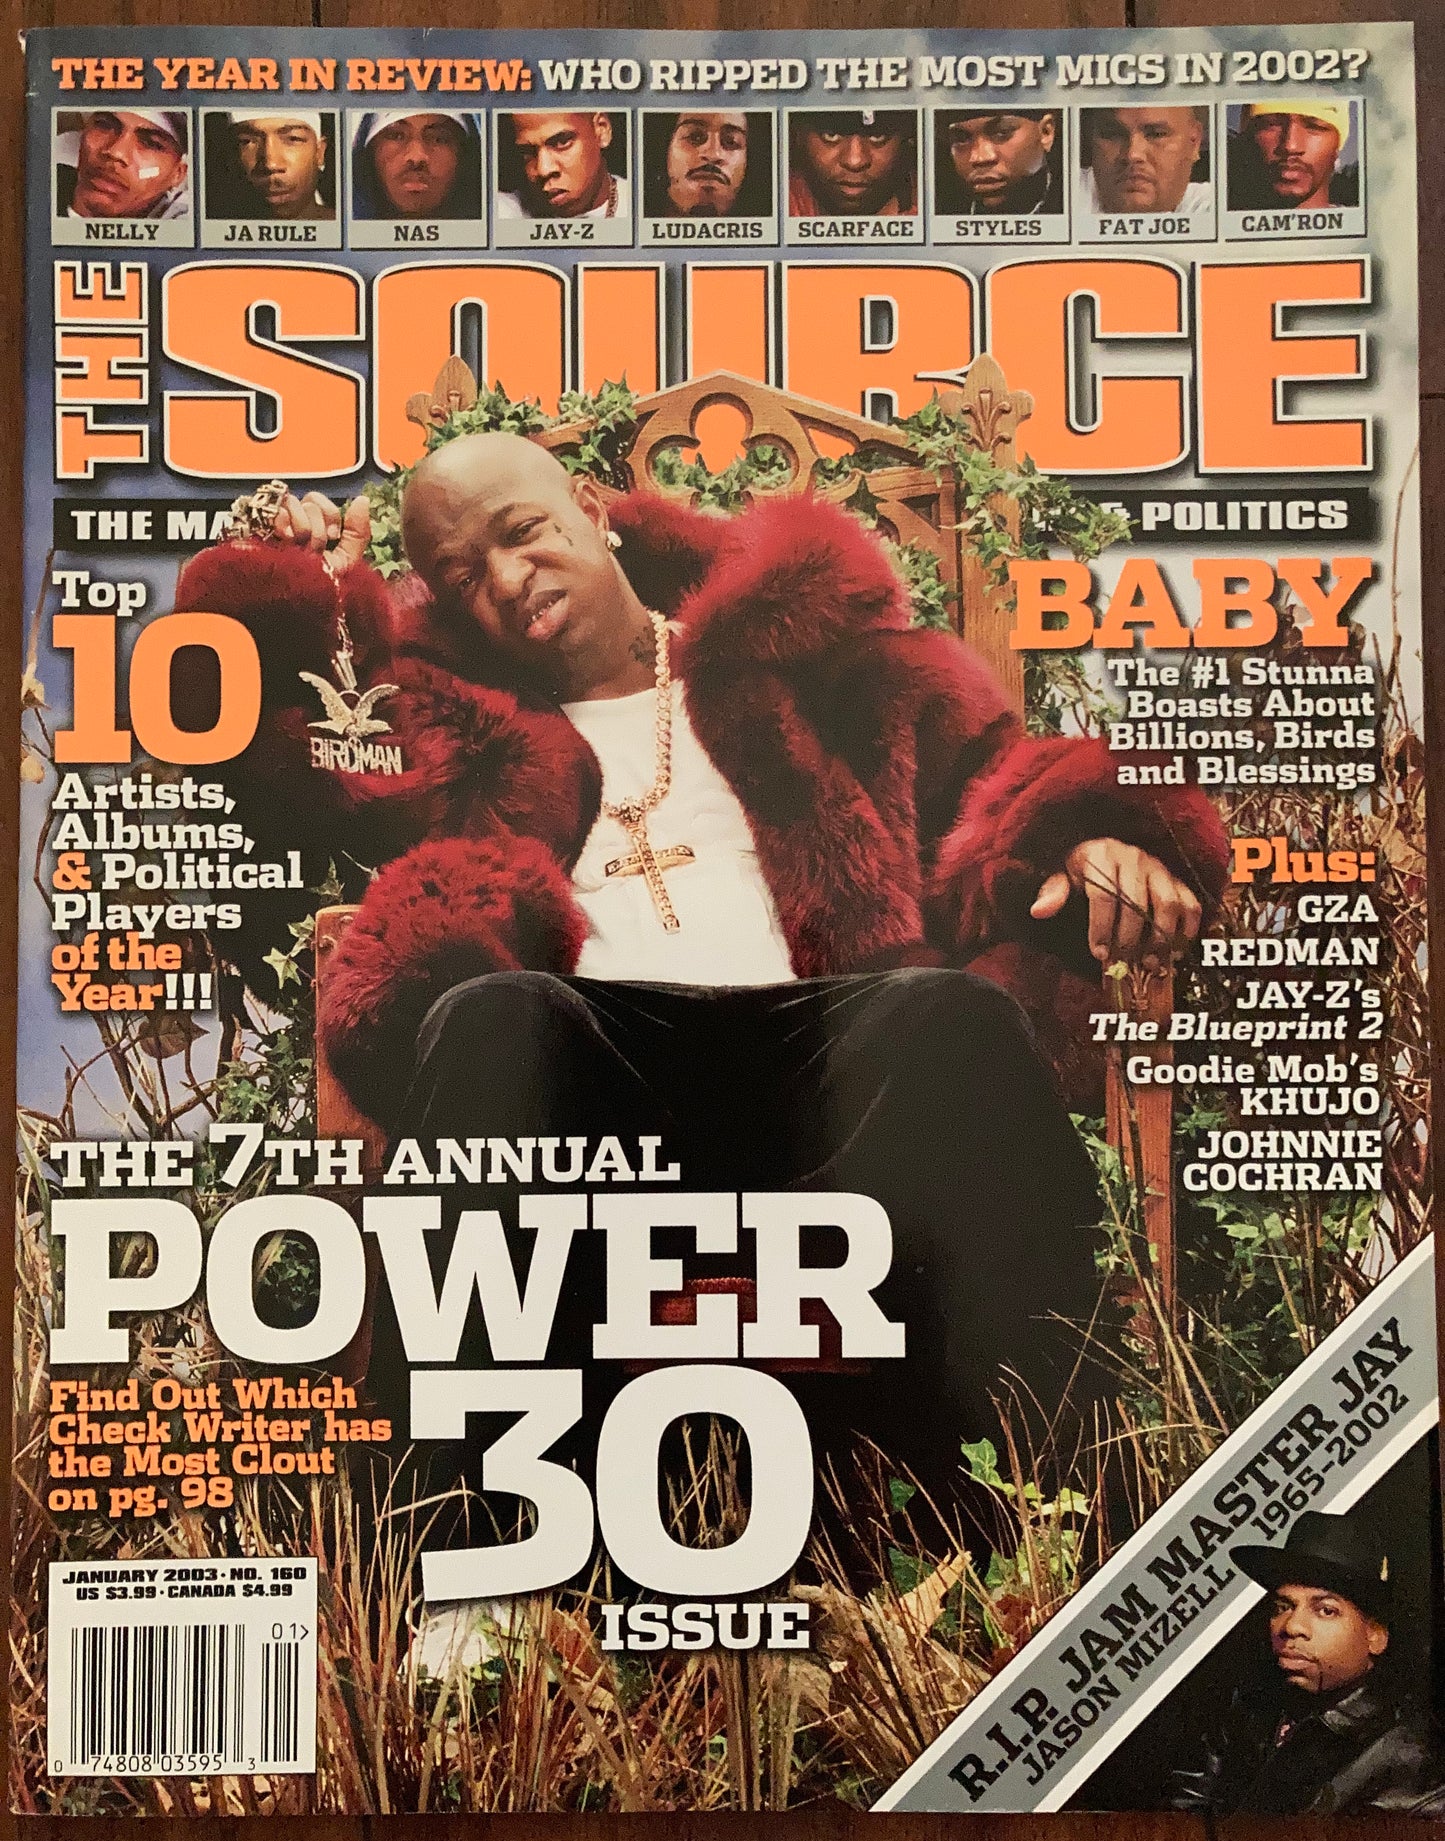 The Source Magazine January 2003 Baby - MoSneaks Shop Online